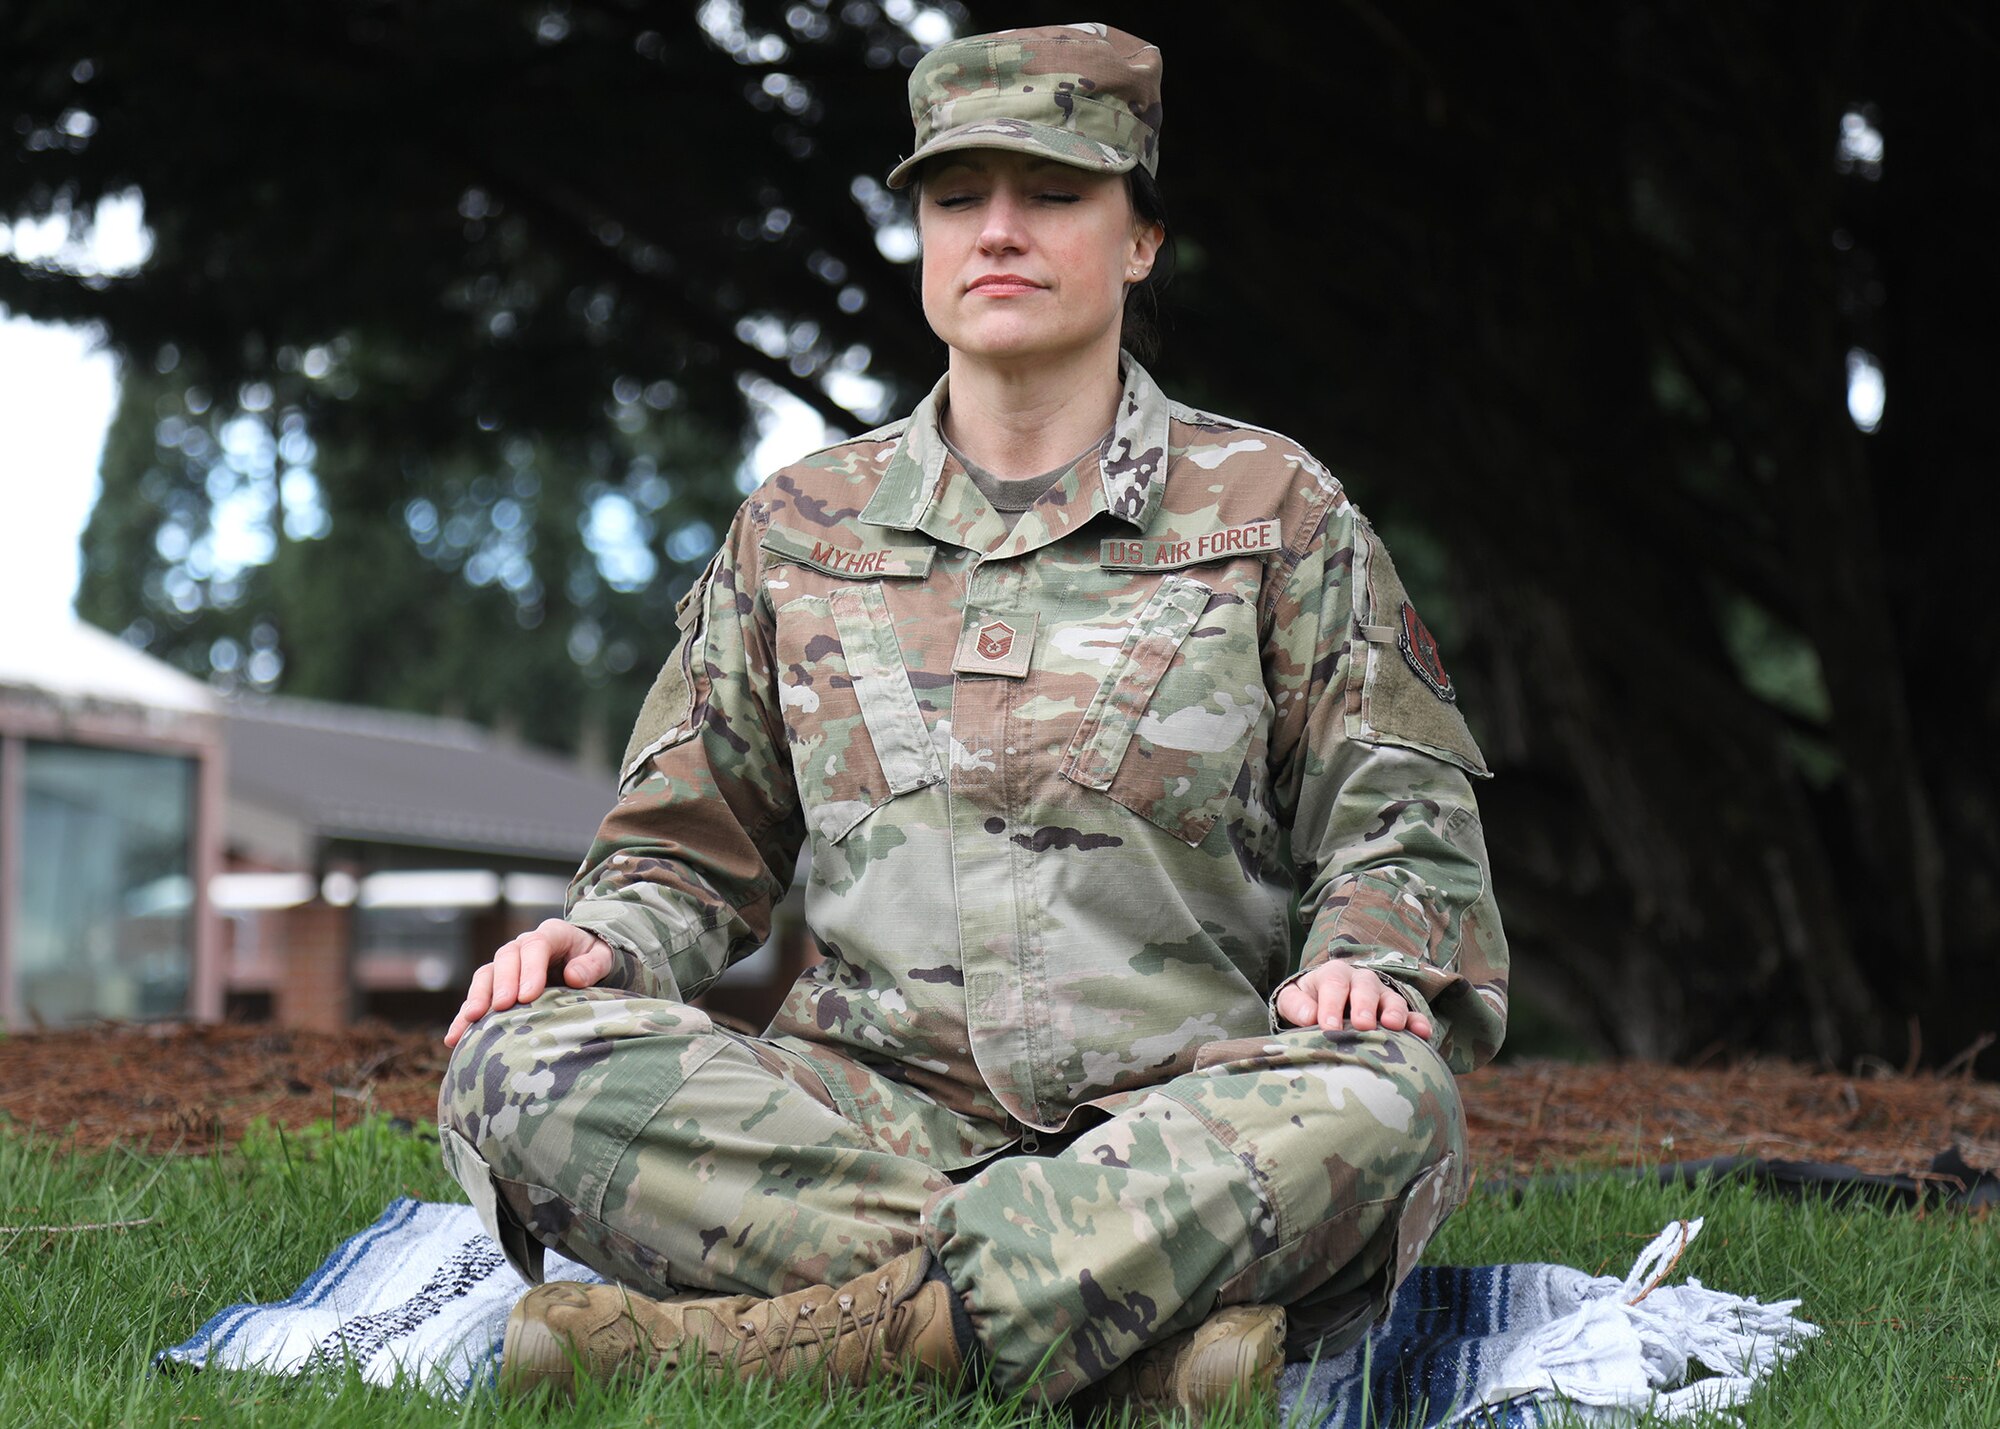 U.S. Air Force Master Sgt. Kathleen A. Myhre, 446th Airman and Family Readiness Center noncommissioned officer in charge, meditates outside the 446th Airlift Wing Headquarters building on Joint Base Lewis-McChord, Washington, Feb. 12, 2020.